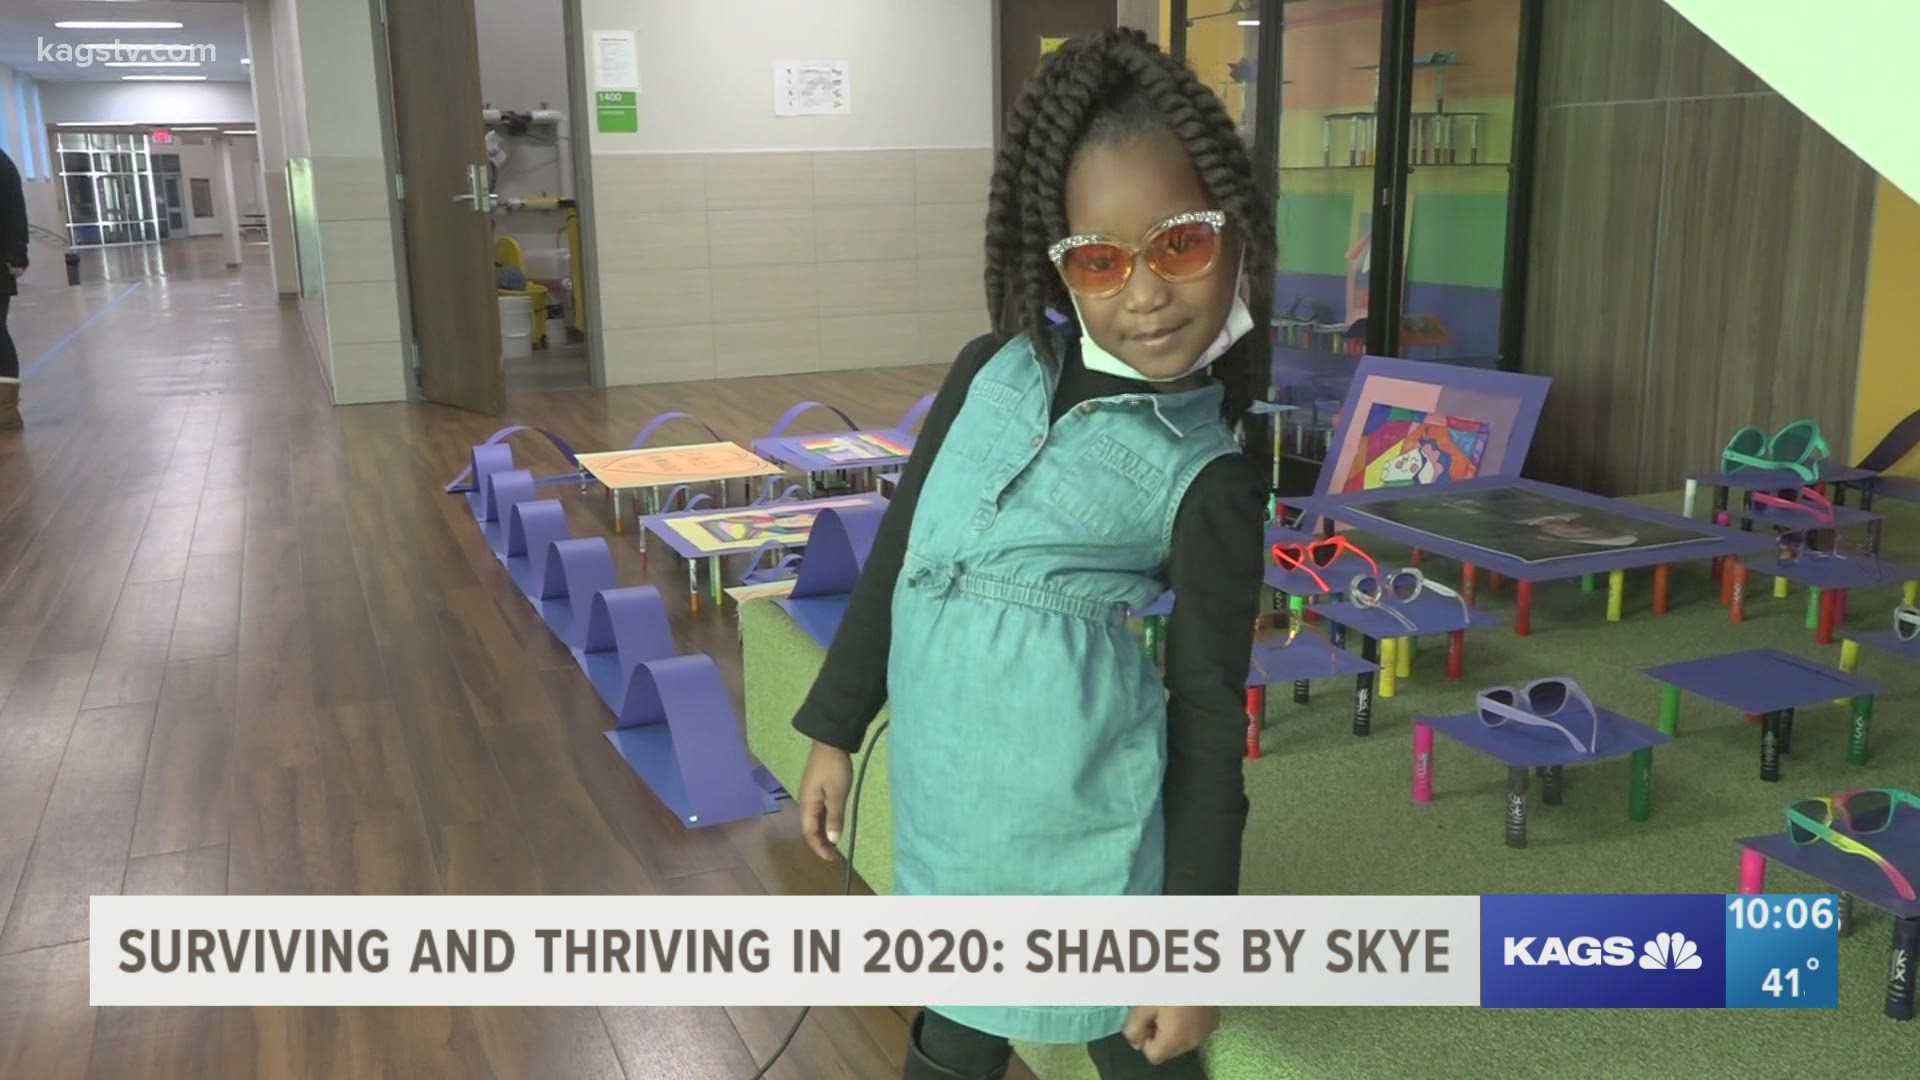 Skye and her mom, Evette took turned playtime into a passion with their accessory business they started this year.